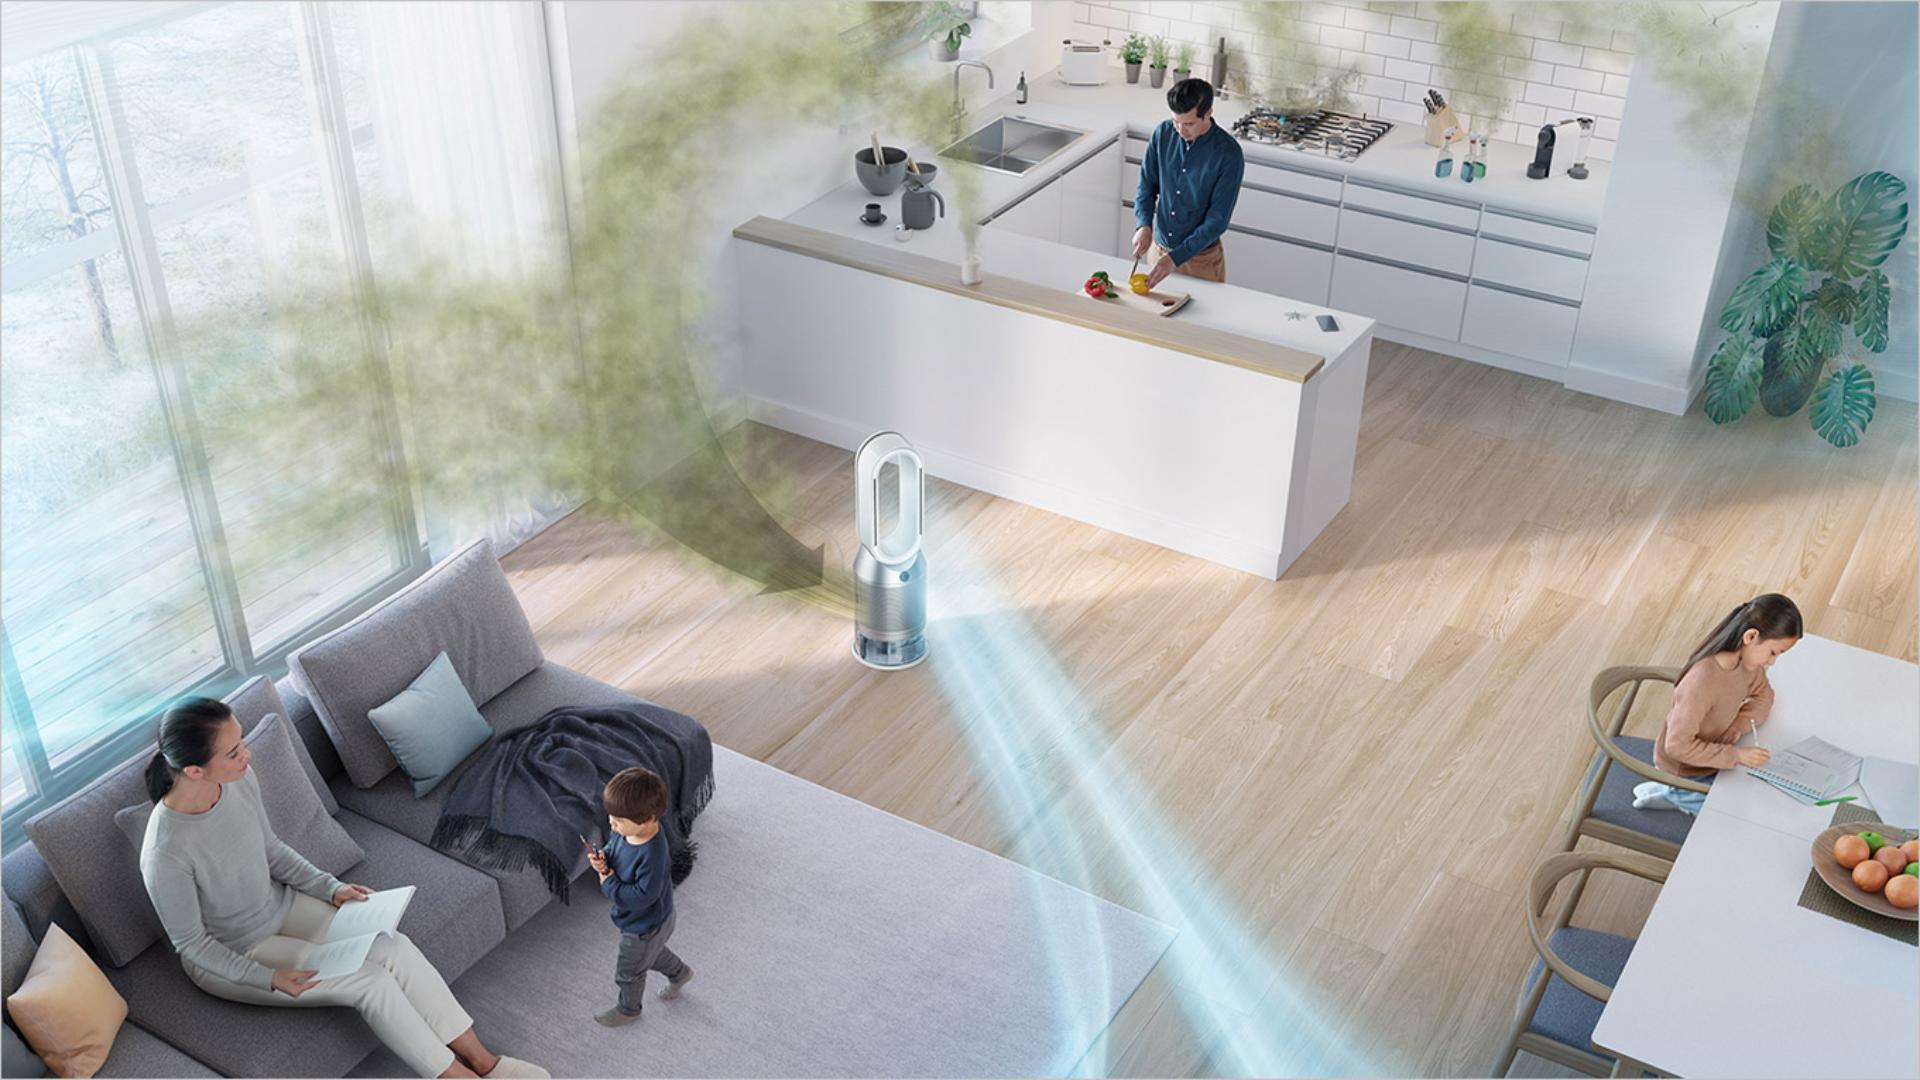 Dyson air purifier removing particles, odours and allergens in a large living space